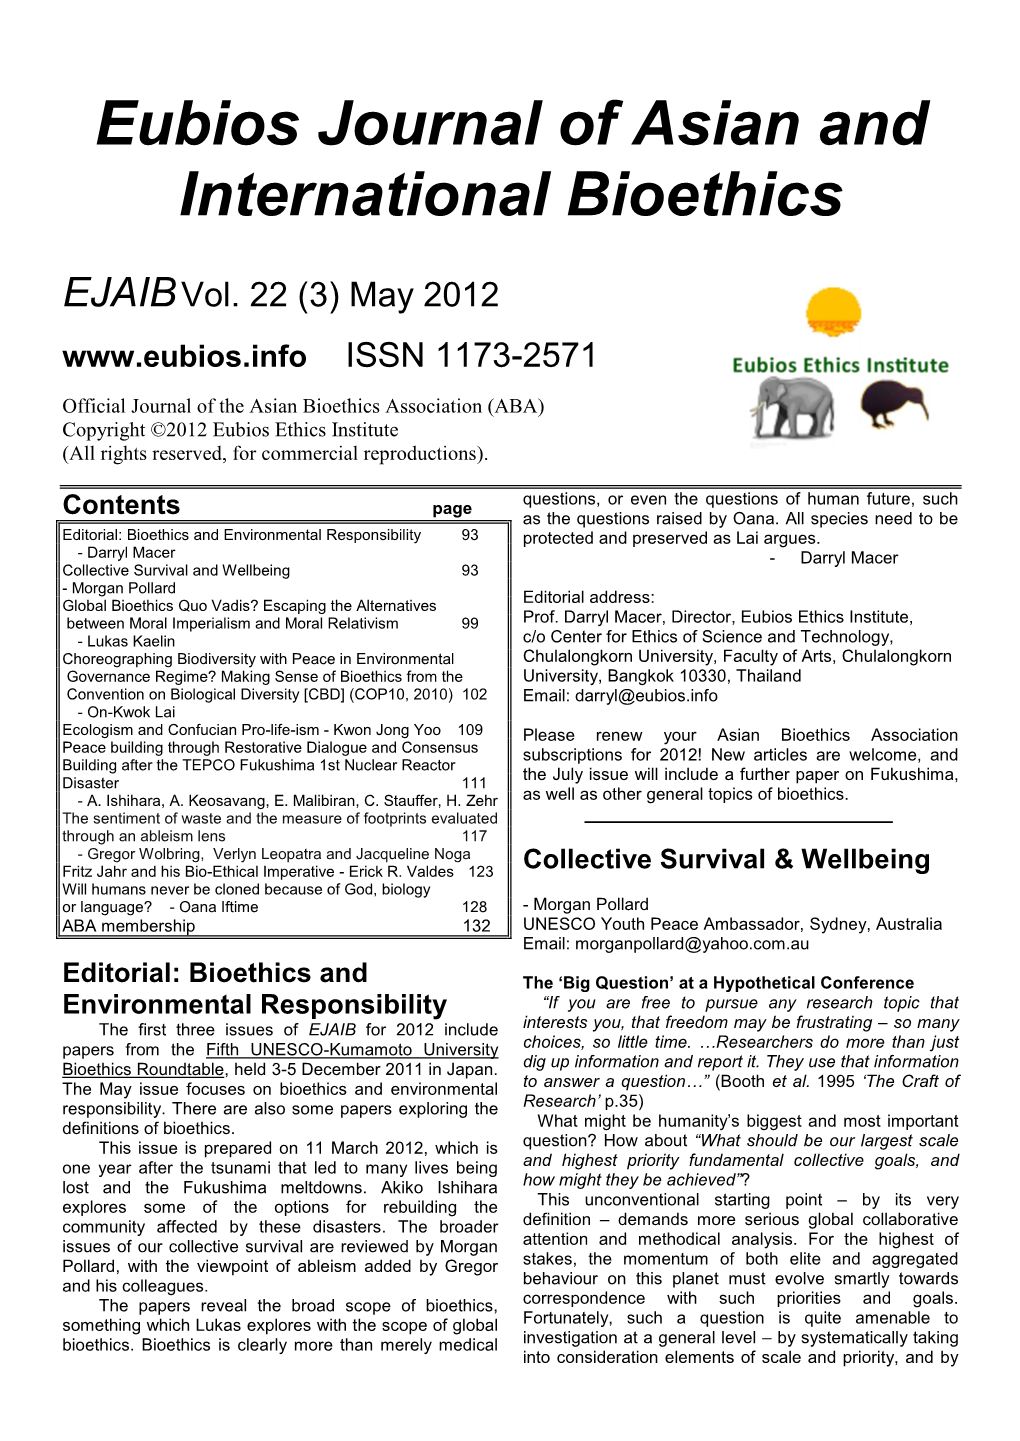 Eubios Journal of Asian and International Bioethics